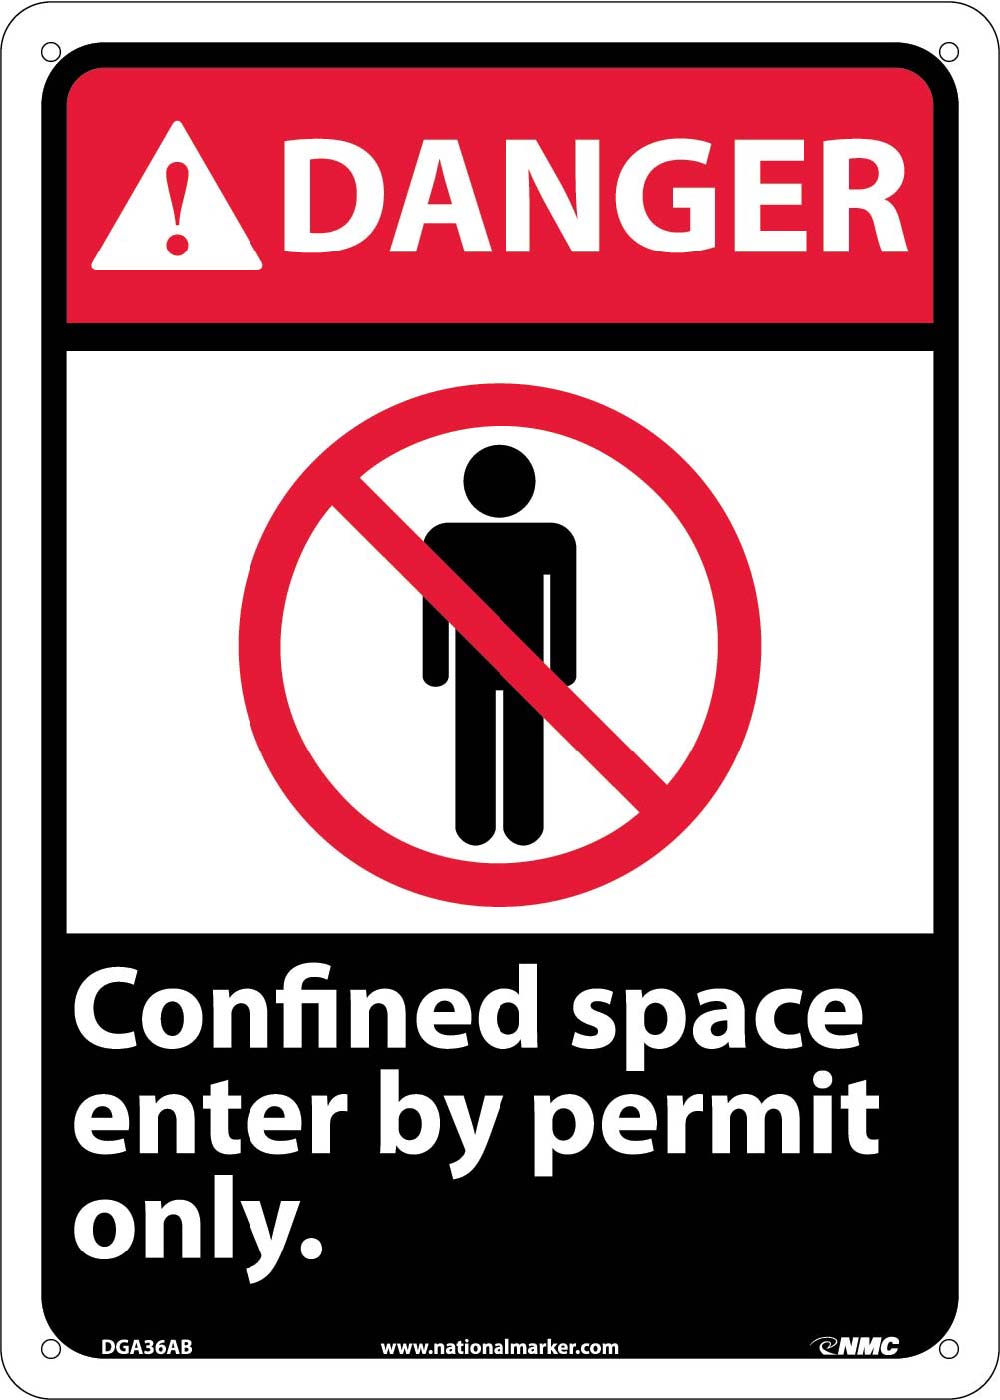 Danger Confined Space Enter By Permit Only Sign-eSafety Supplies, Inc